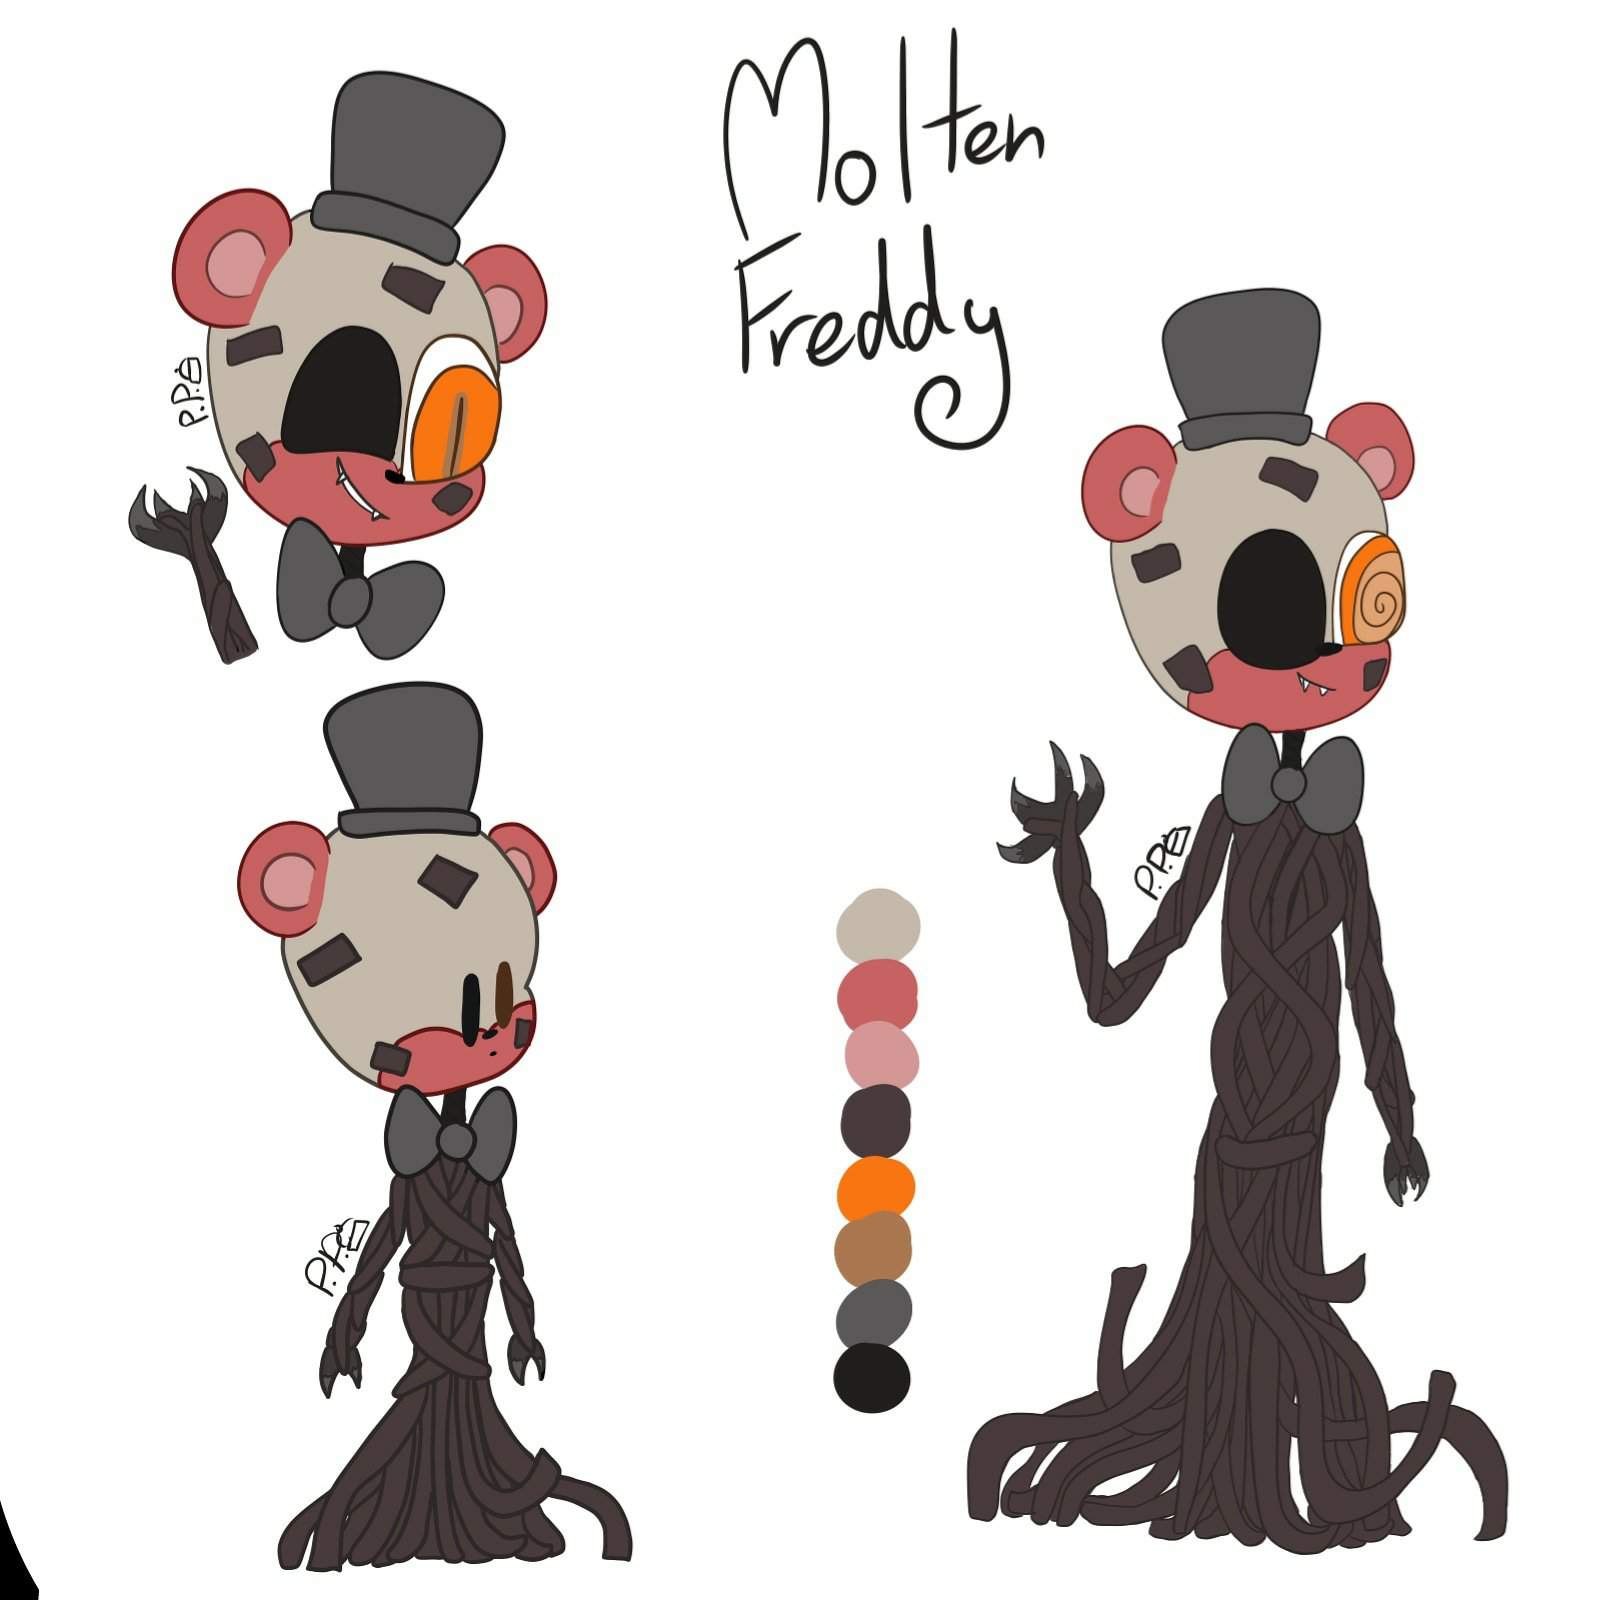 So, here's some drawings of molten freddy! 